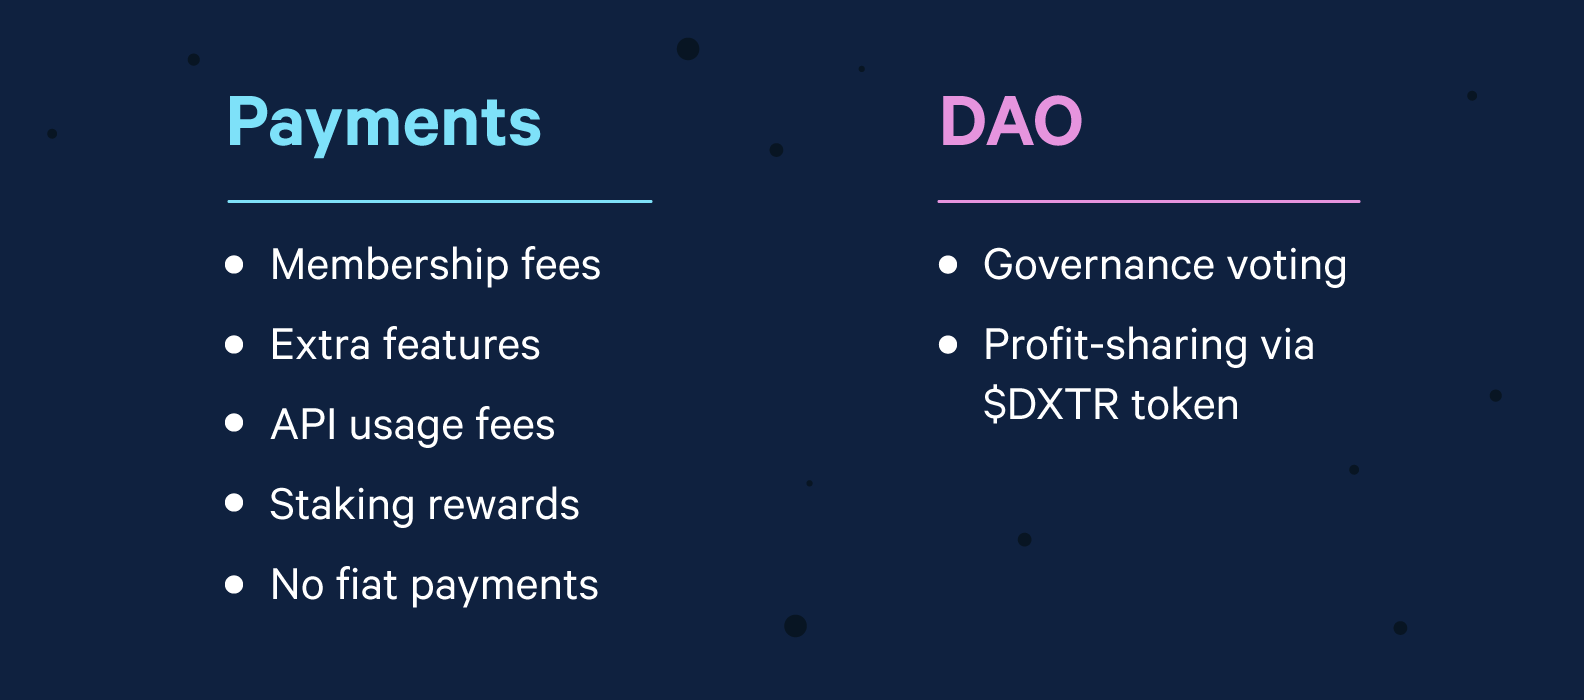 Payments and DAO